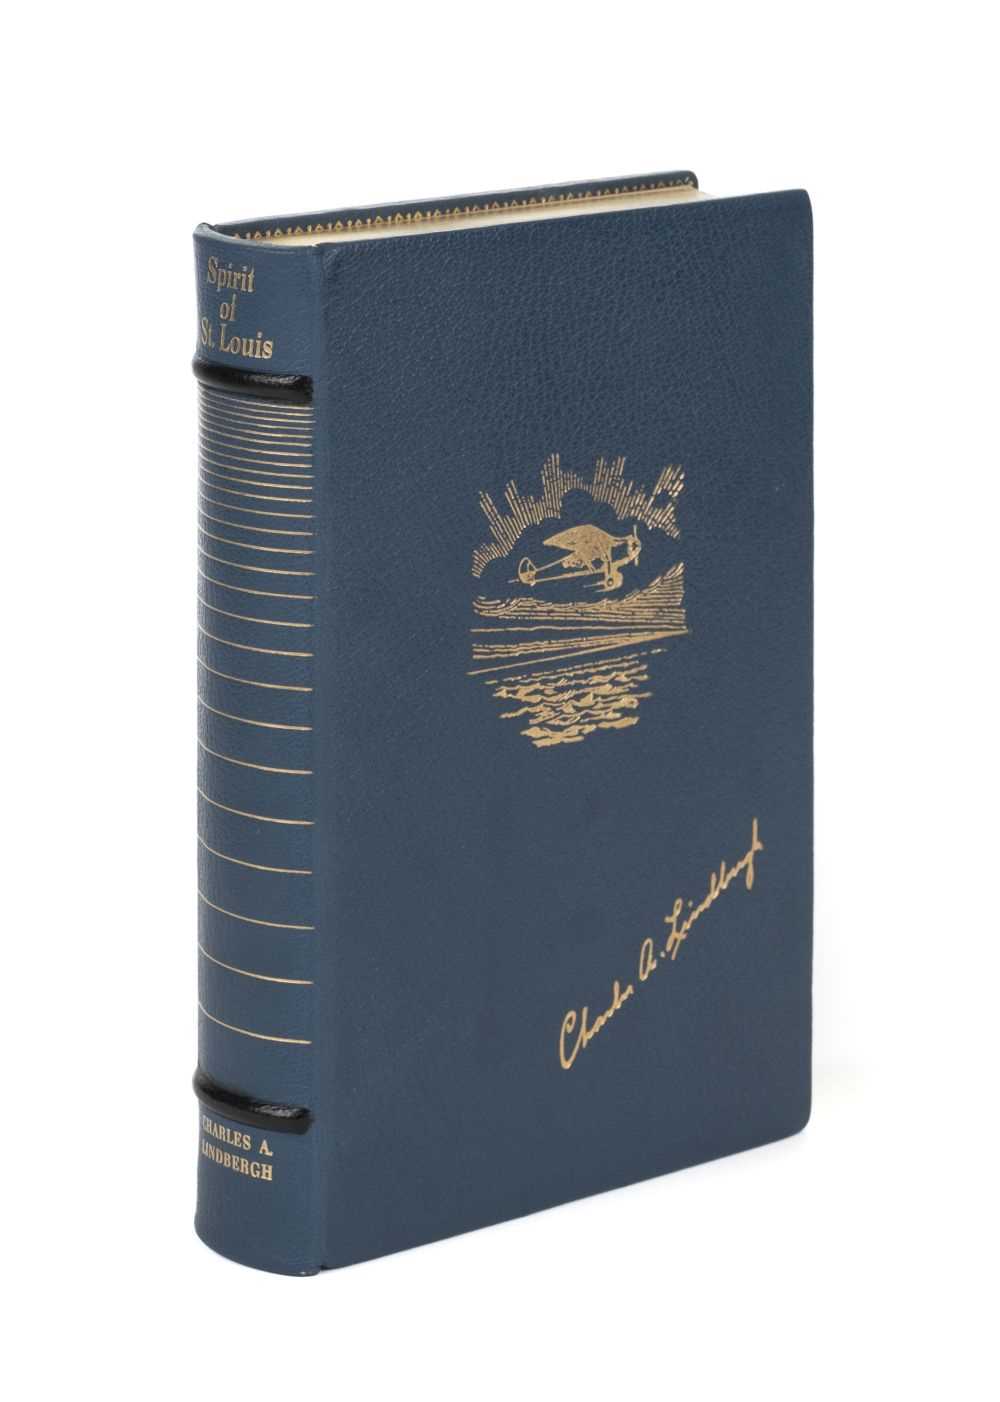 Lot 383 - Lindbergh (Charles A.). Spirit of St. Louis, 1st edition in Swedish, 1954, signed by Lindbergh